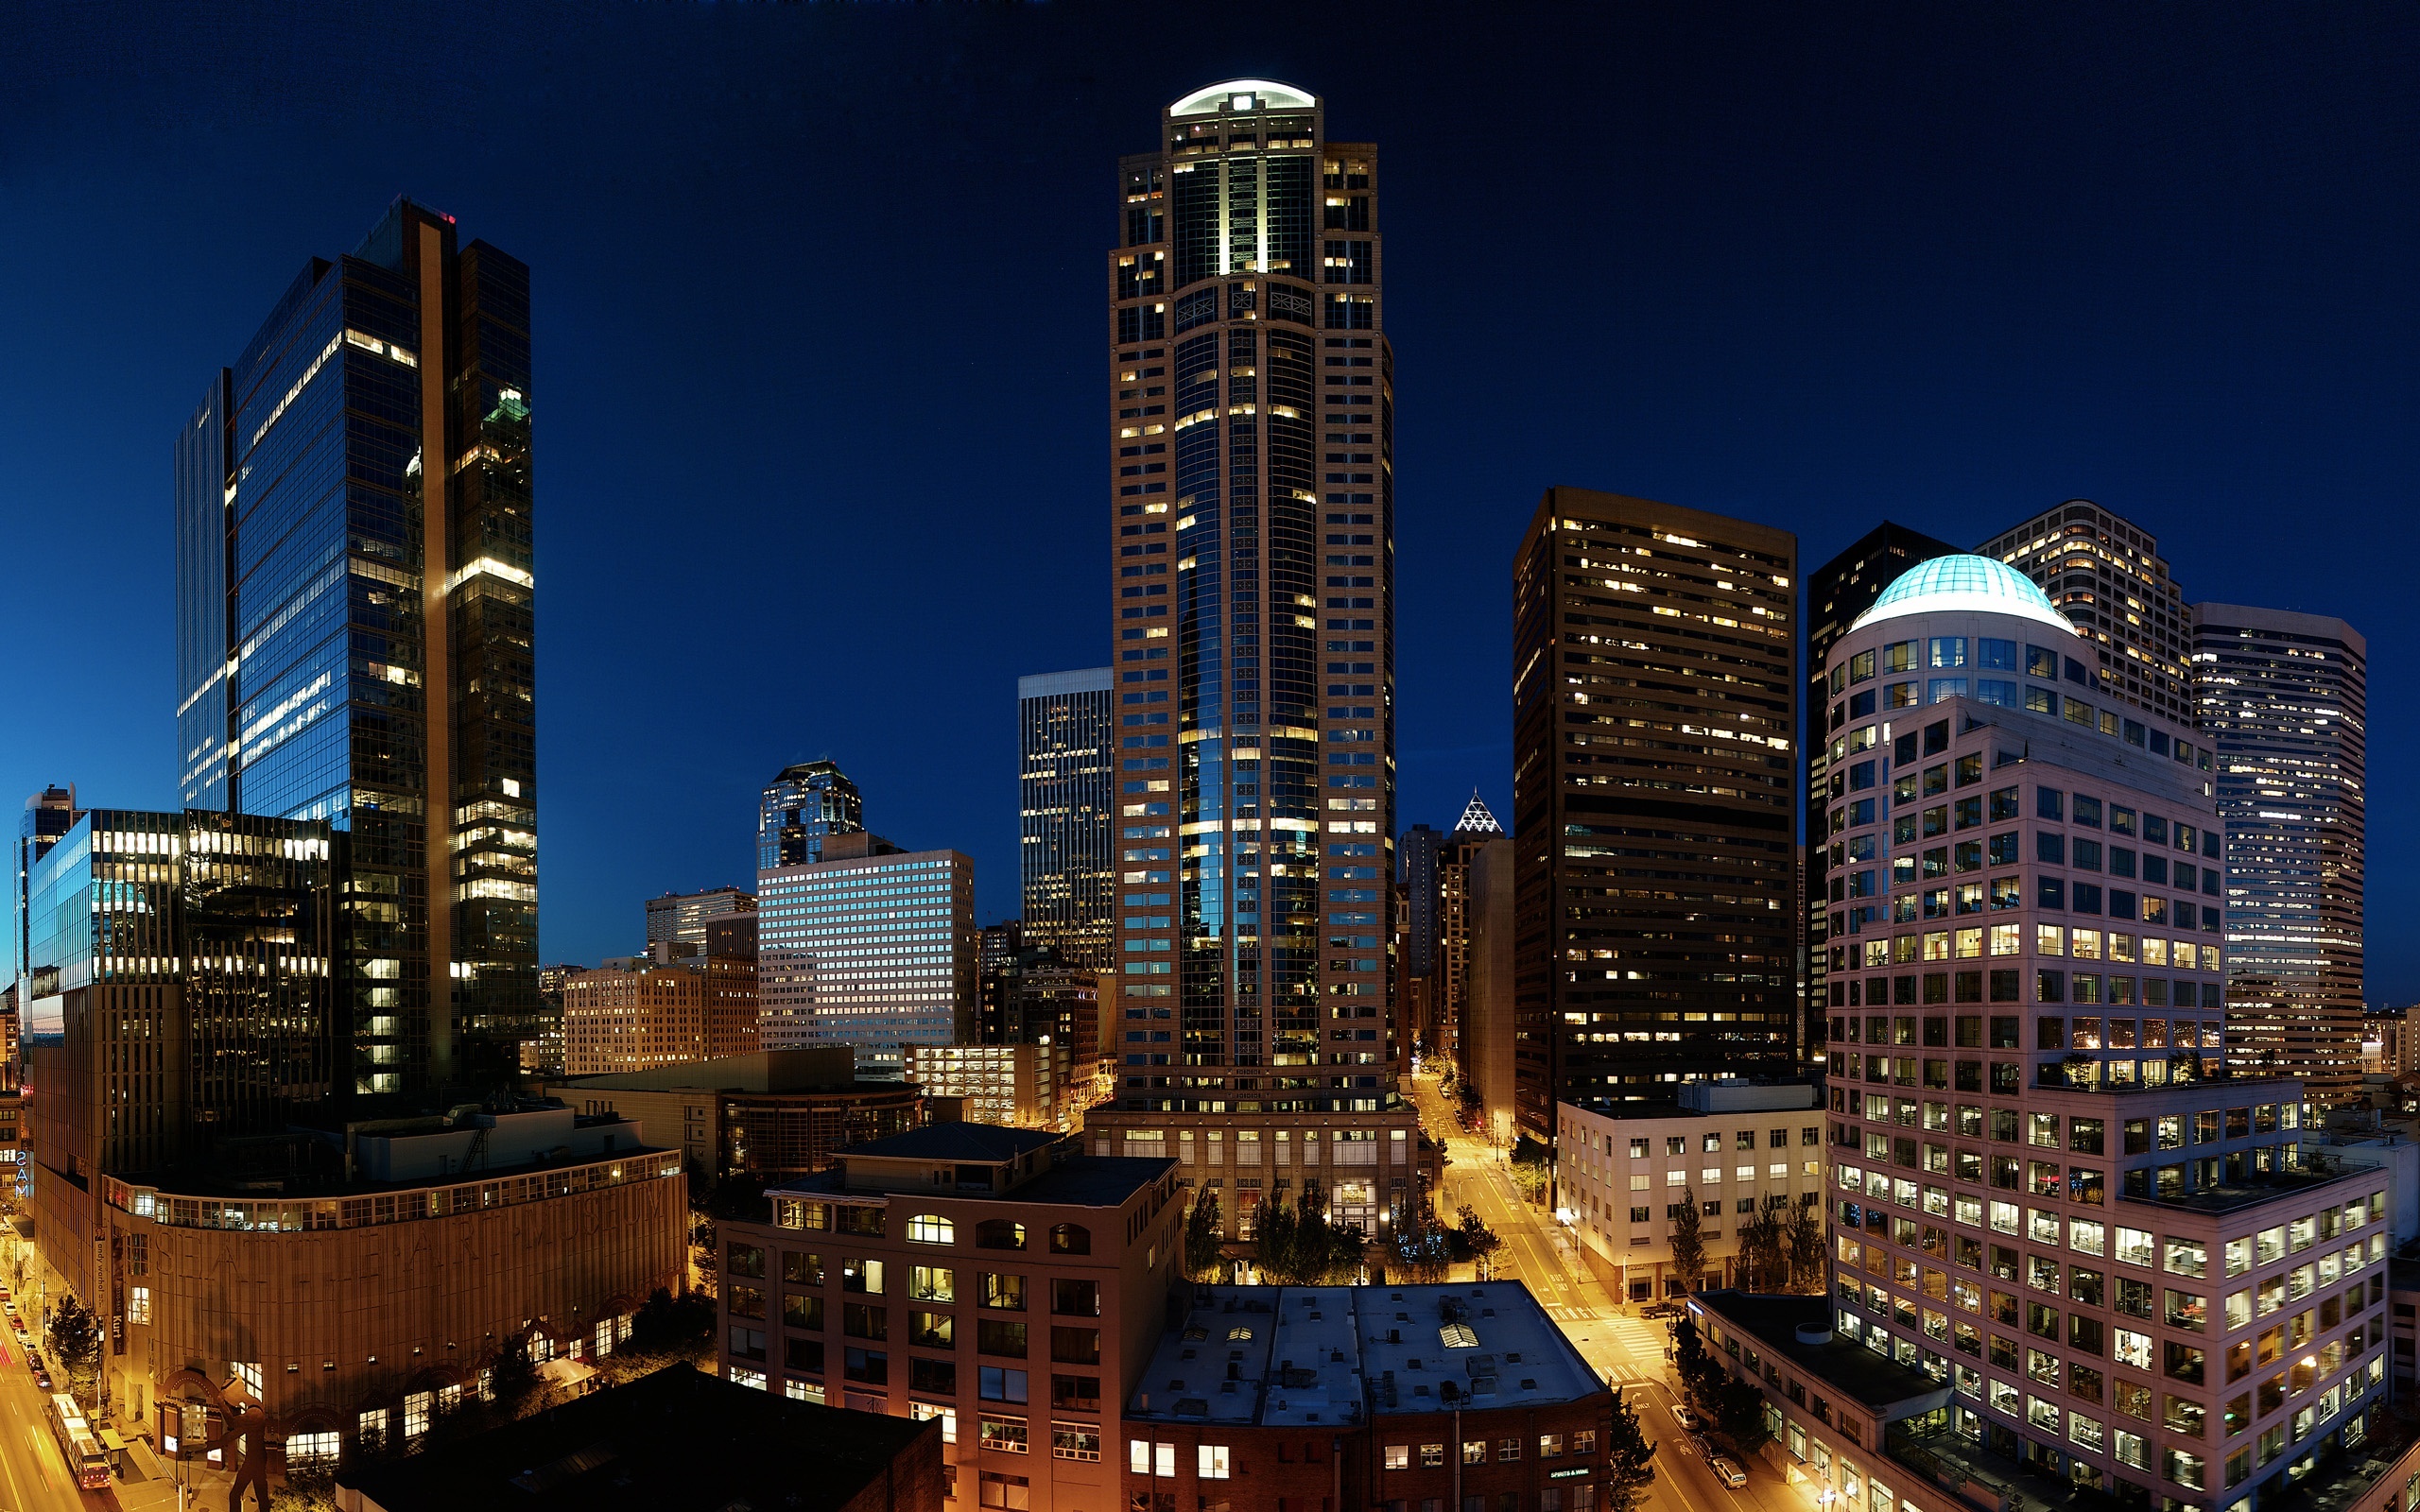 Seattle Night Lights Wallpapers   2560x1600   1635807